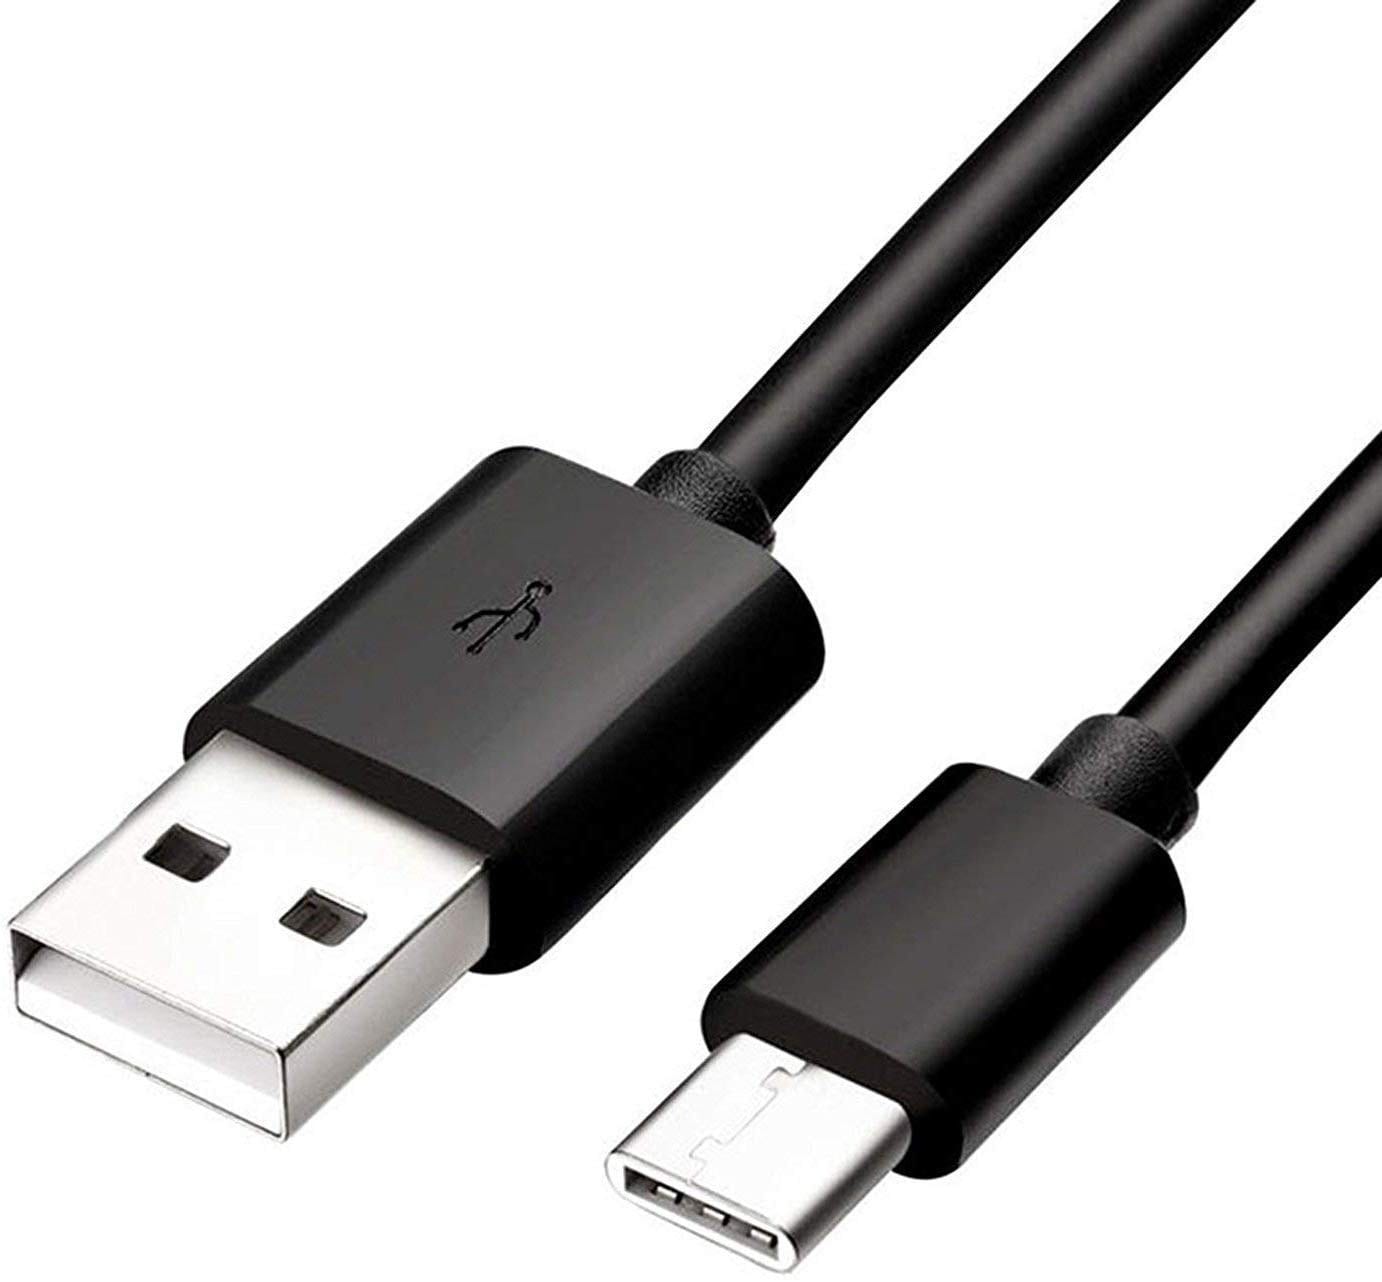 Samsung Galaxy A70 USB Cable to Type C Charging Cable Lead Black - 2M - SmartPhoneGadgetUK